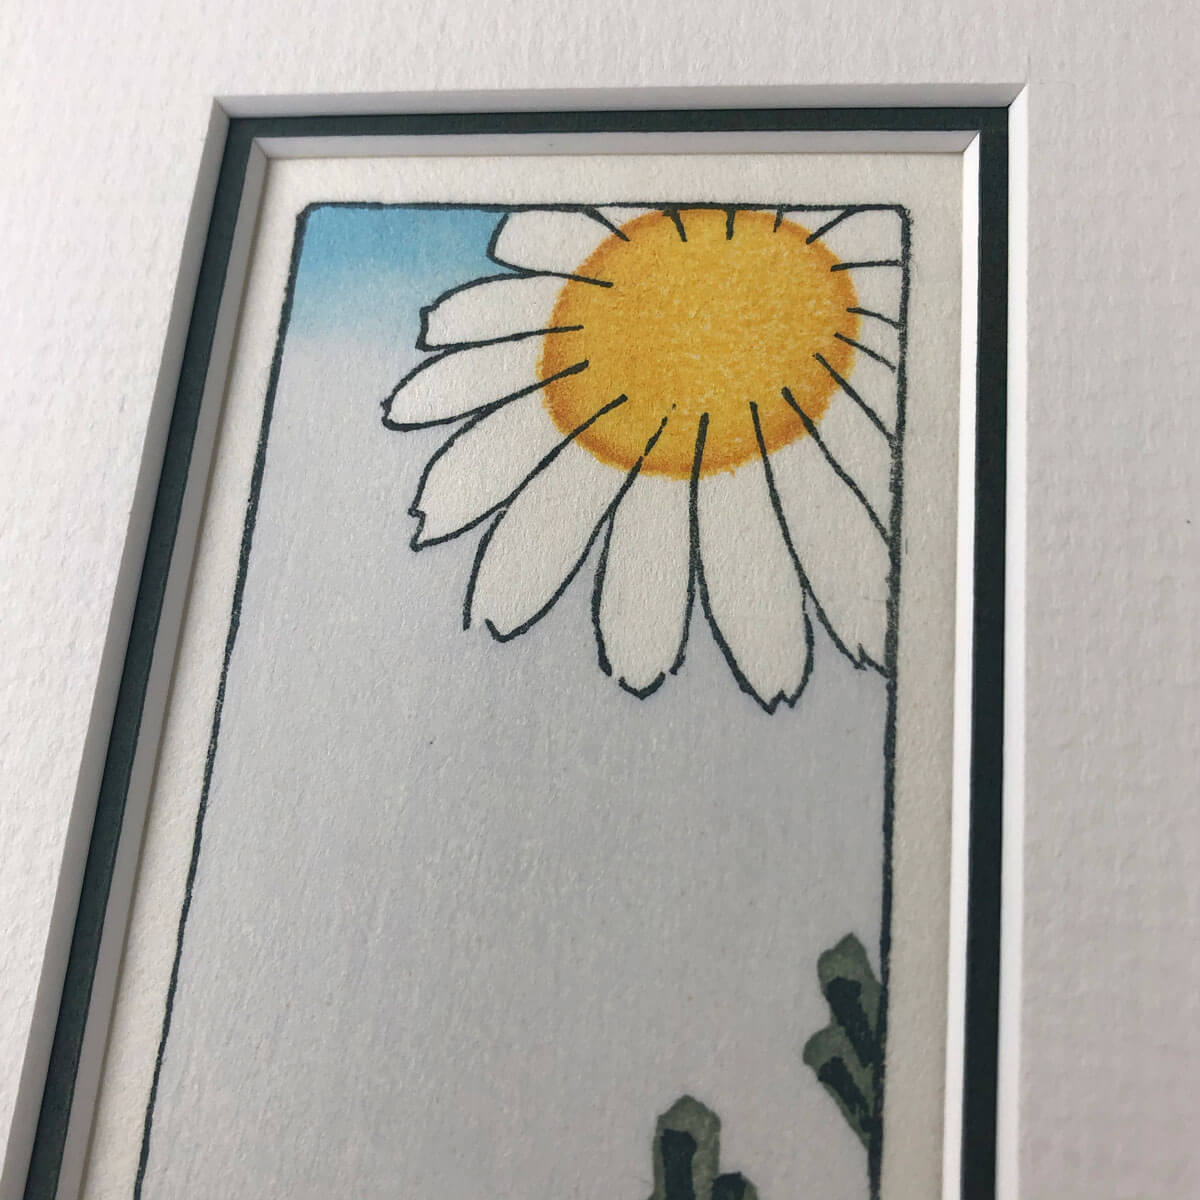 handmade woodblock print of a white daisy with yellow centre against pale blue grey background